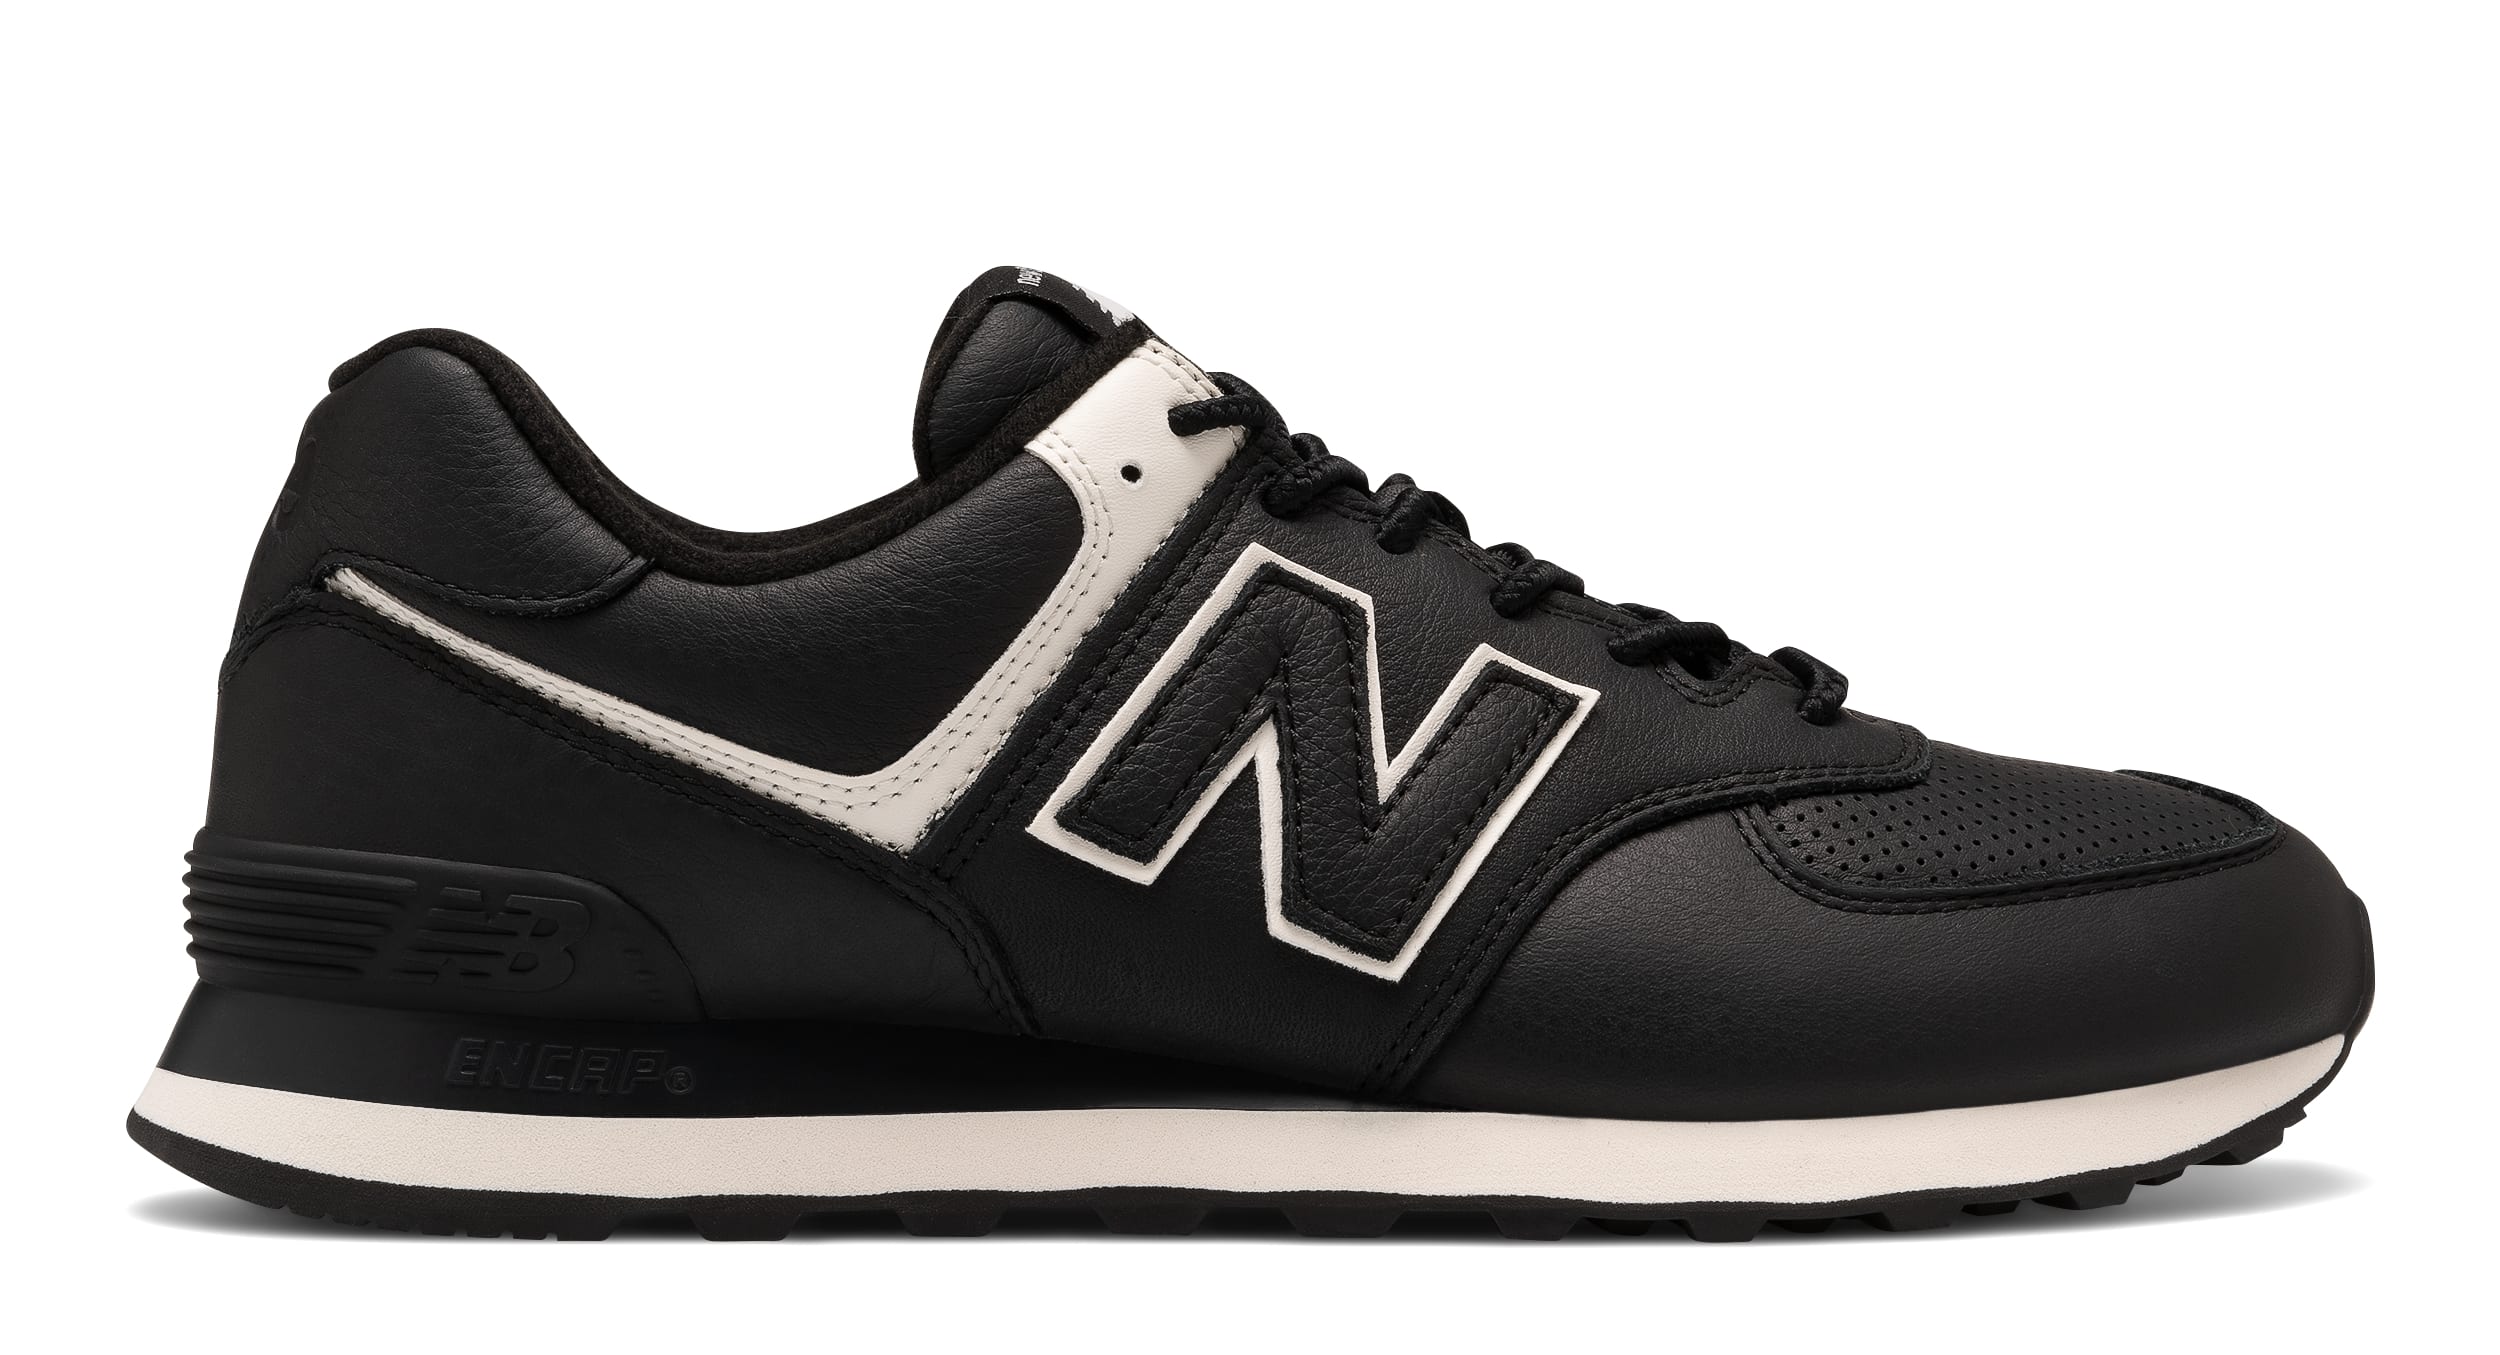 Comme des Garçons Has 5 New Balance Collabs on the Way | Complex